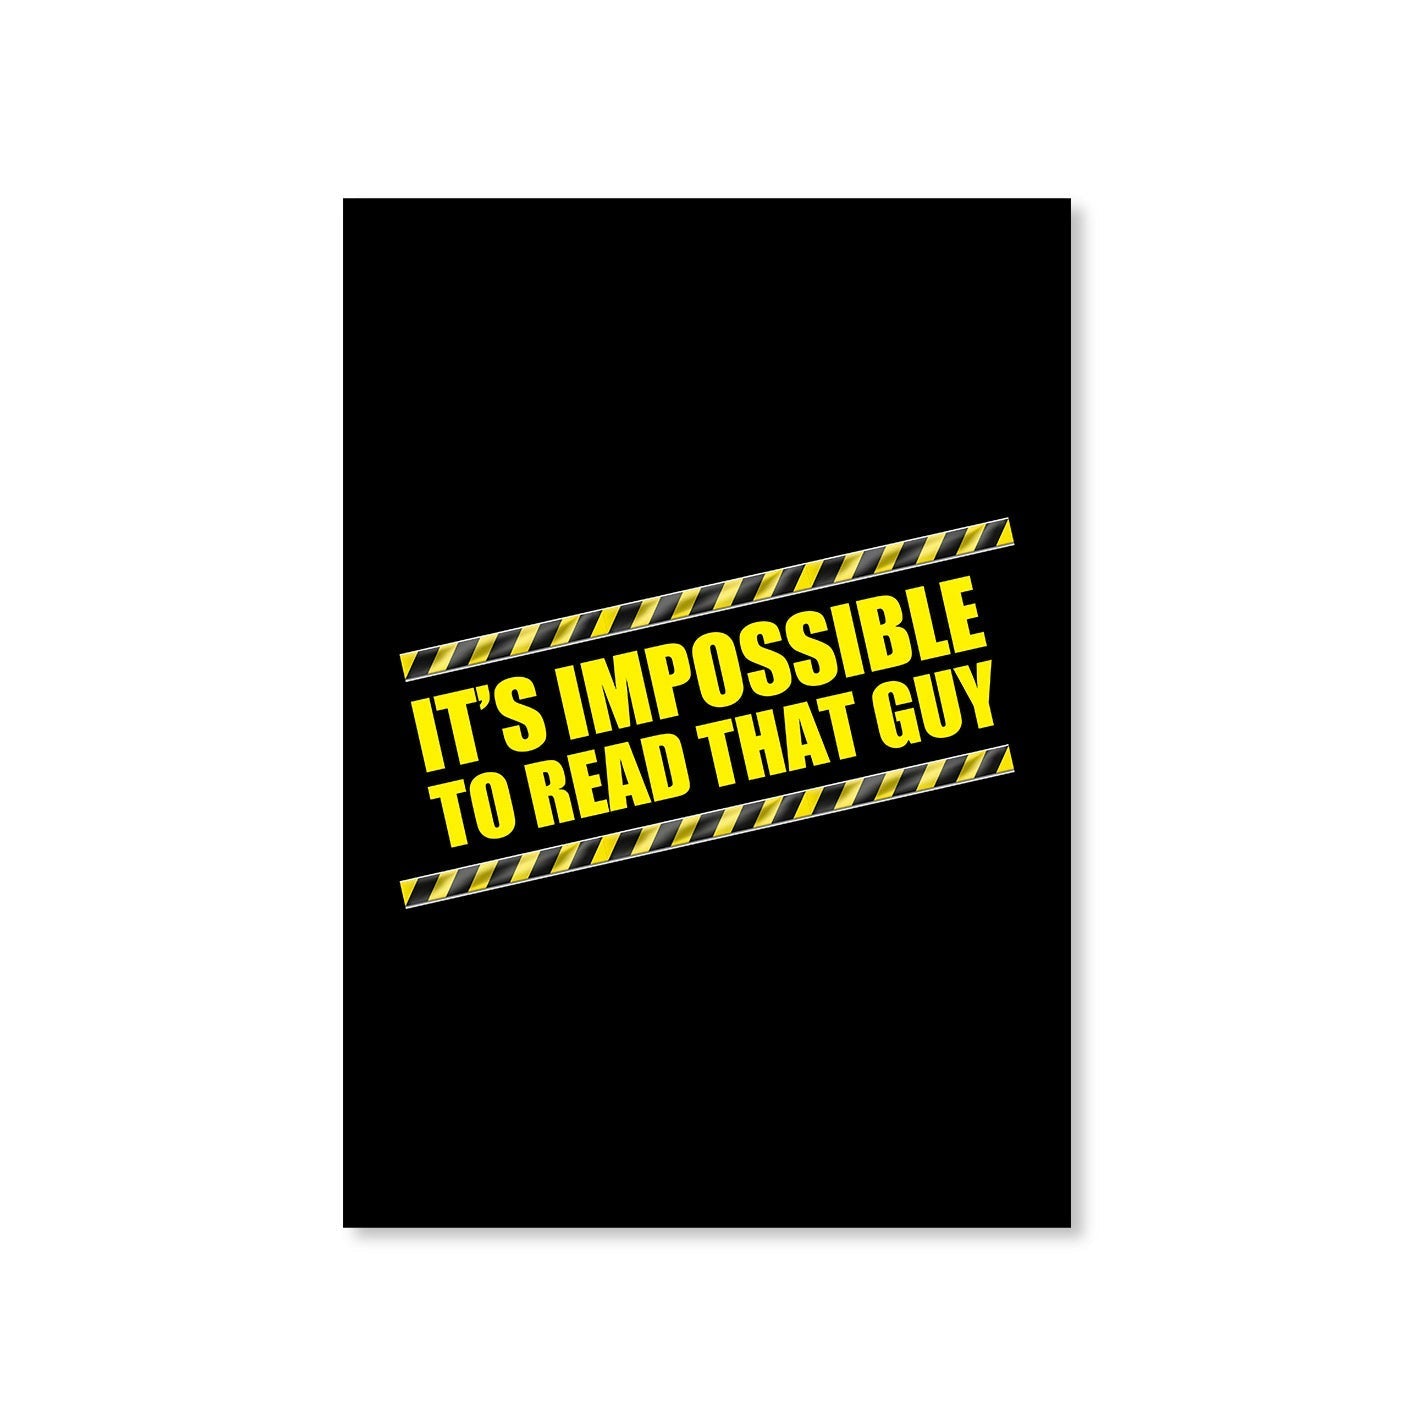 brooklyn nine-nine read that guy poster wall art buy online united states of america usa the banyan tee tbt a4 quote vector art clothing accessories merchandise